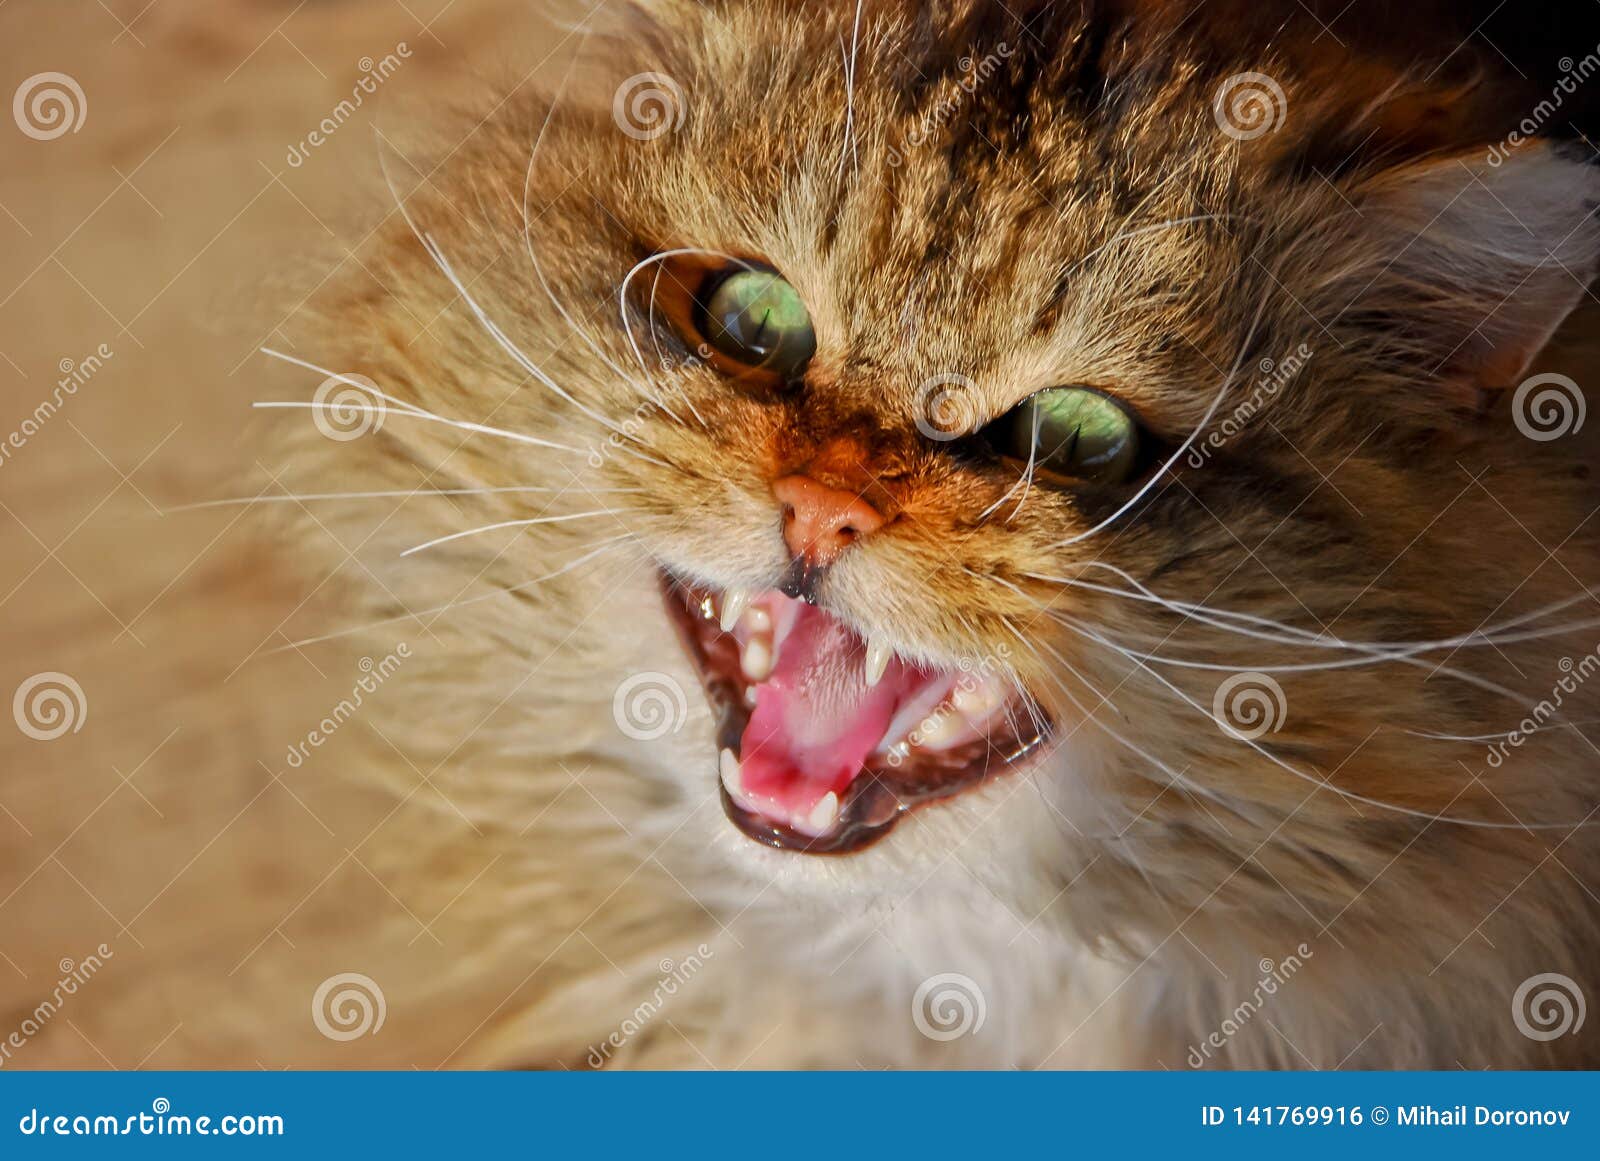 Angry cat stock photo. Image of animal, displeased, meow - 61209272